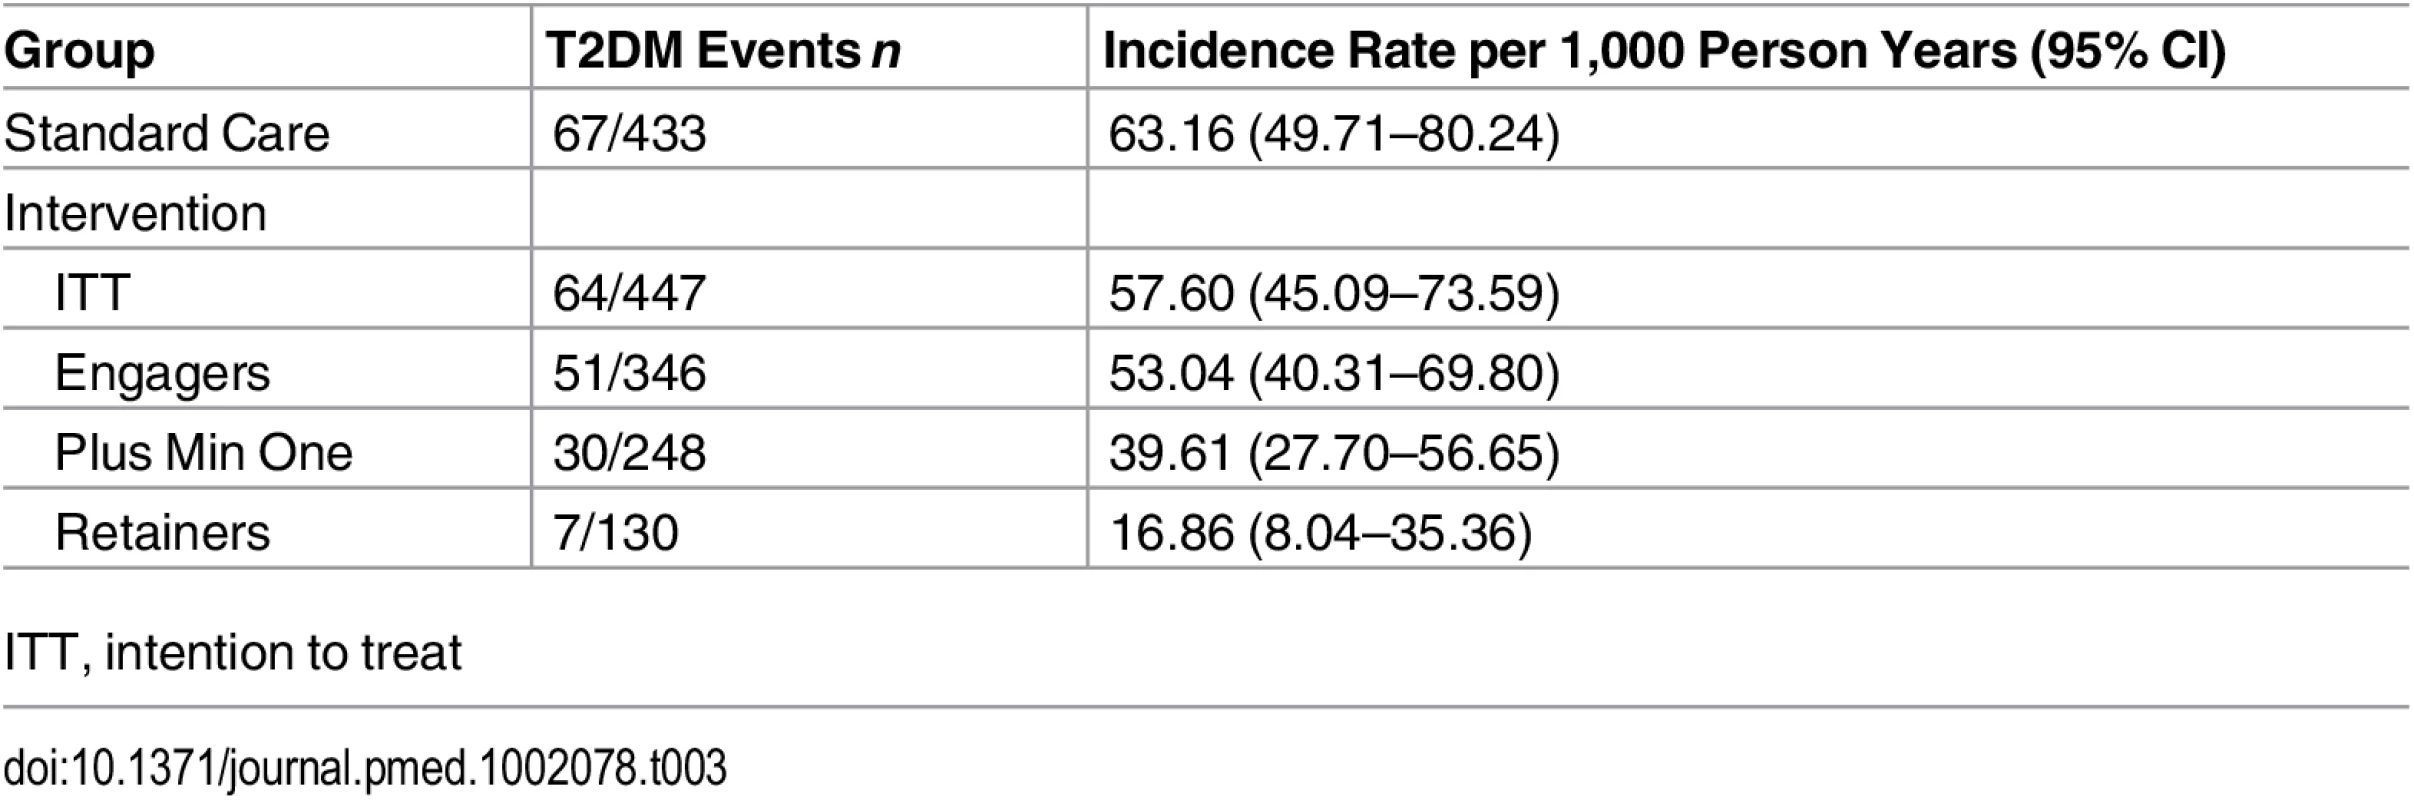 Comparison of T2DM events and incidence rates across groups.